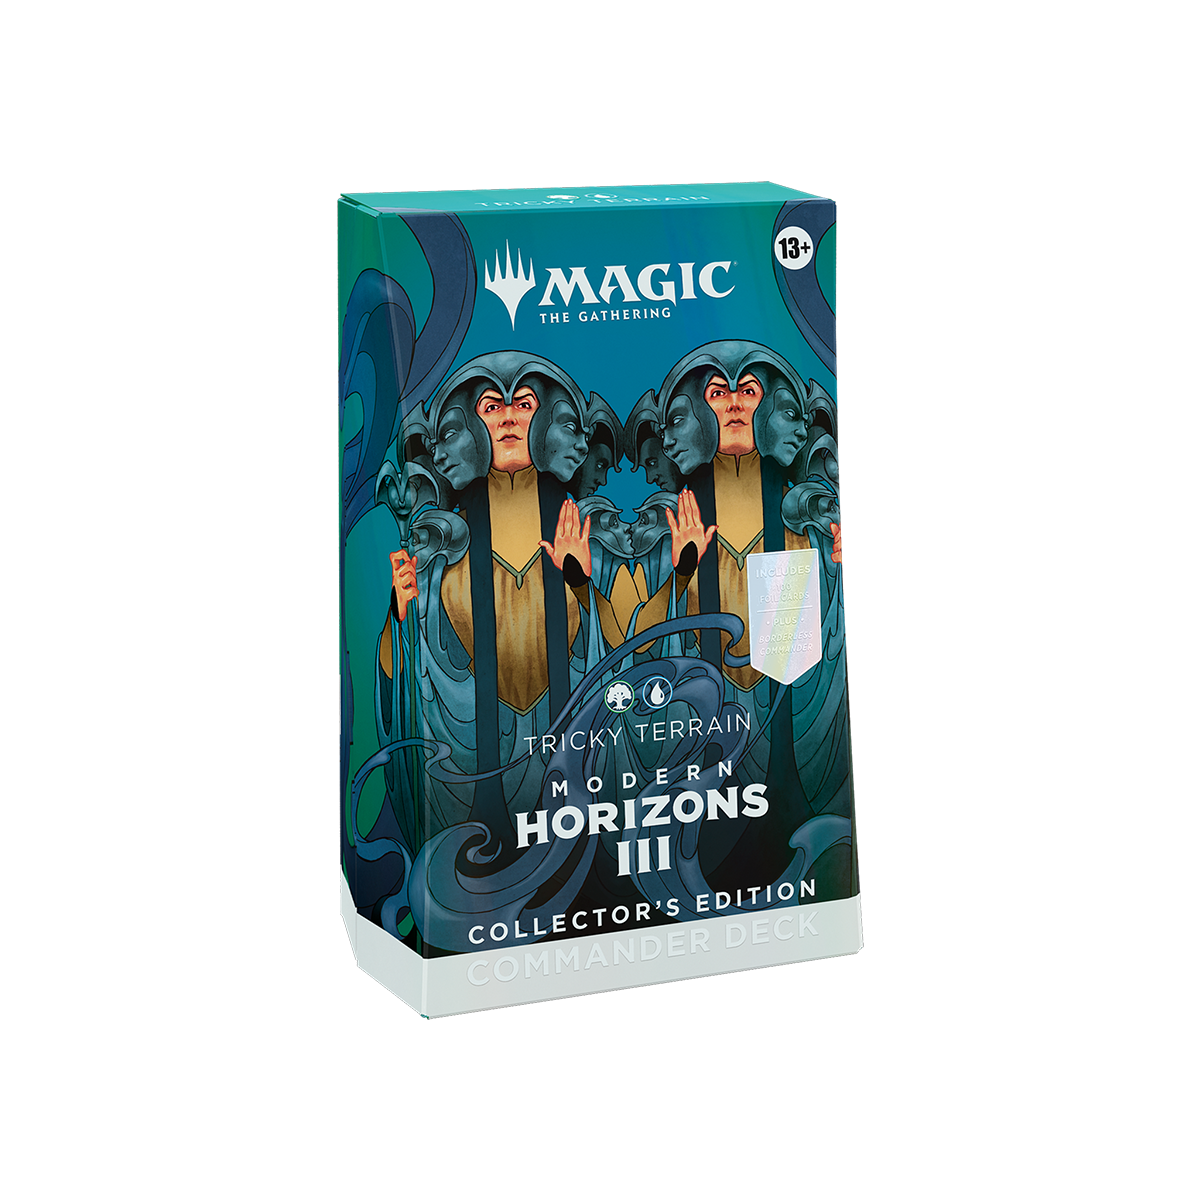 Magic: The Gathering - Modern Horizons 3 Commander-Deck: Collector’s Edition